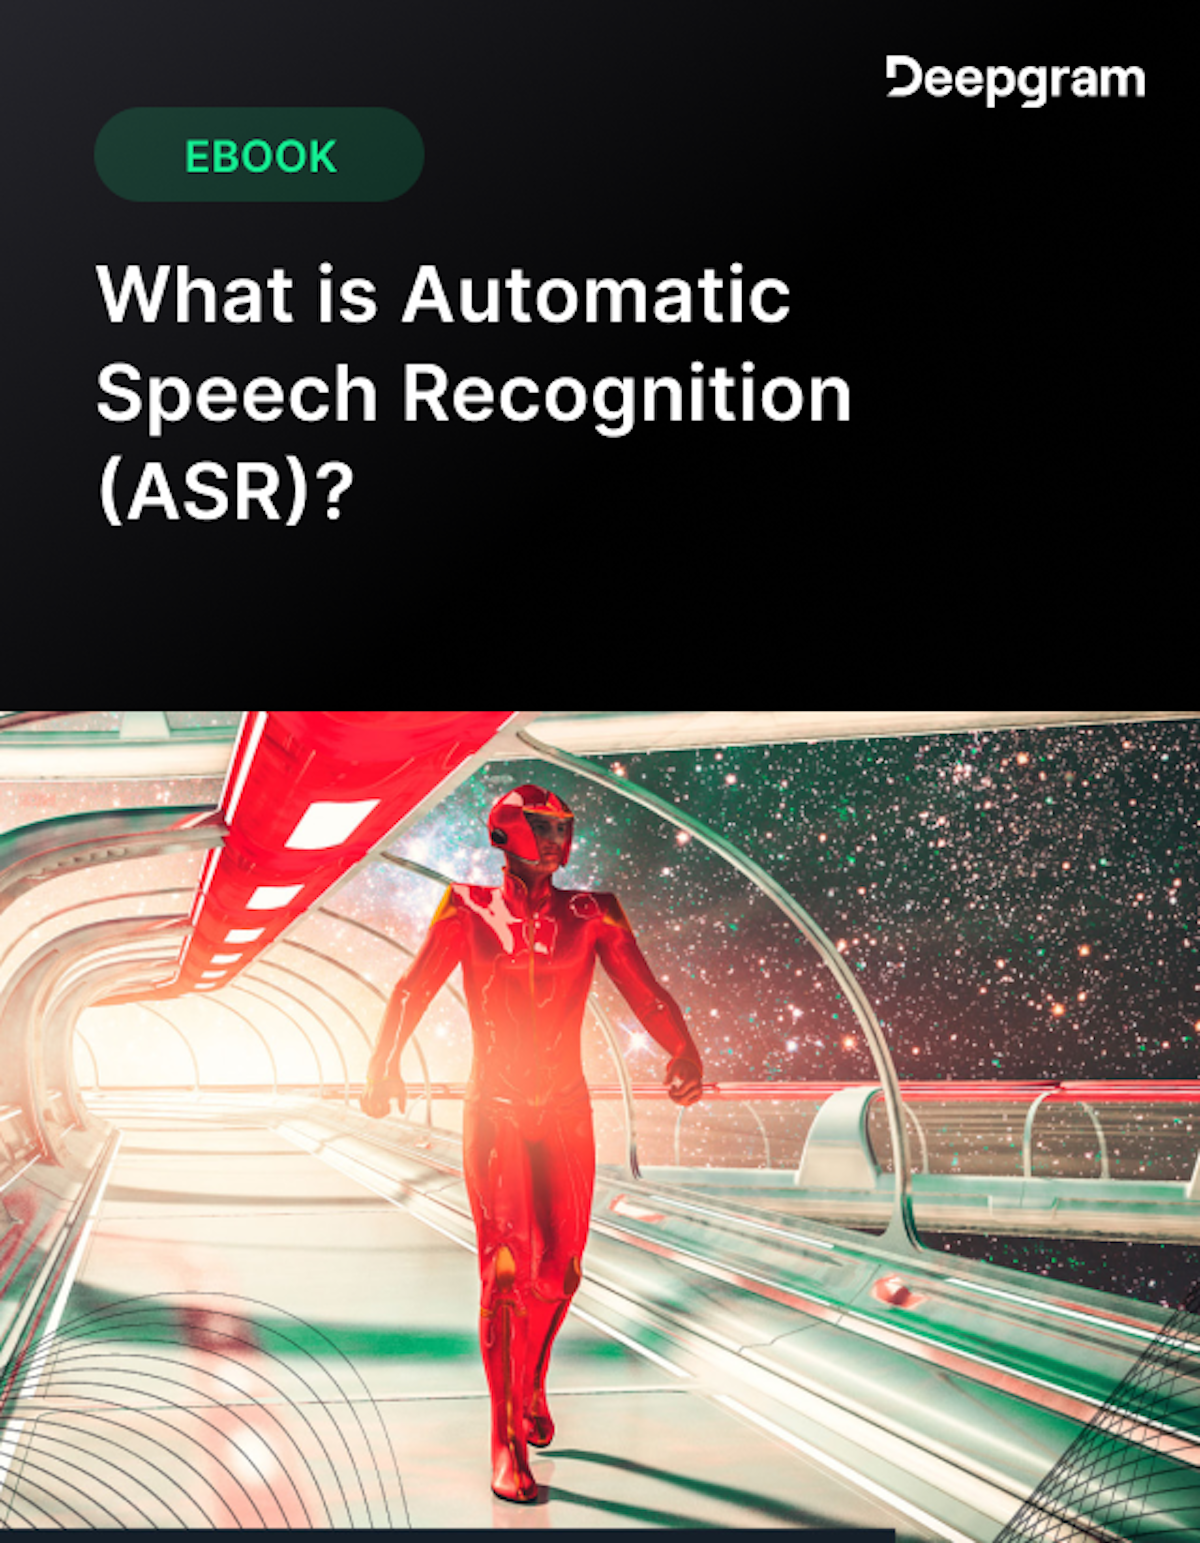 What is Automatic Speech Recognition (ASR)?